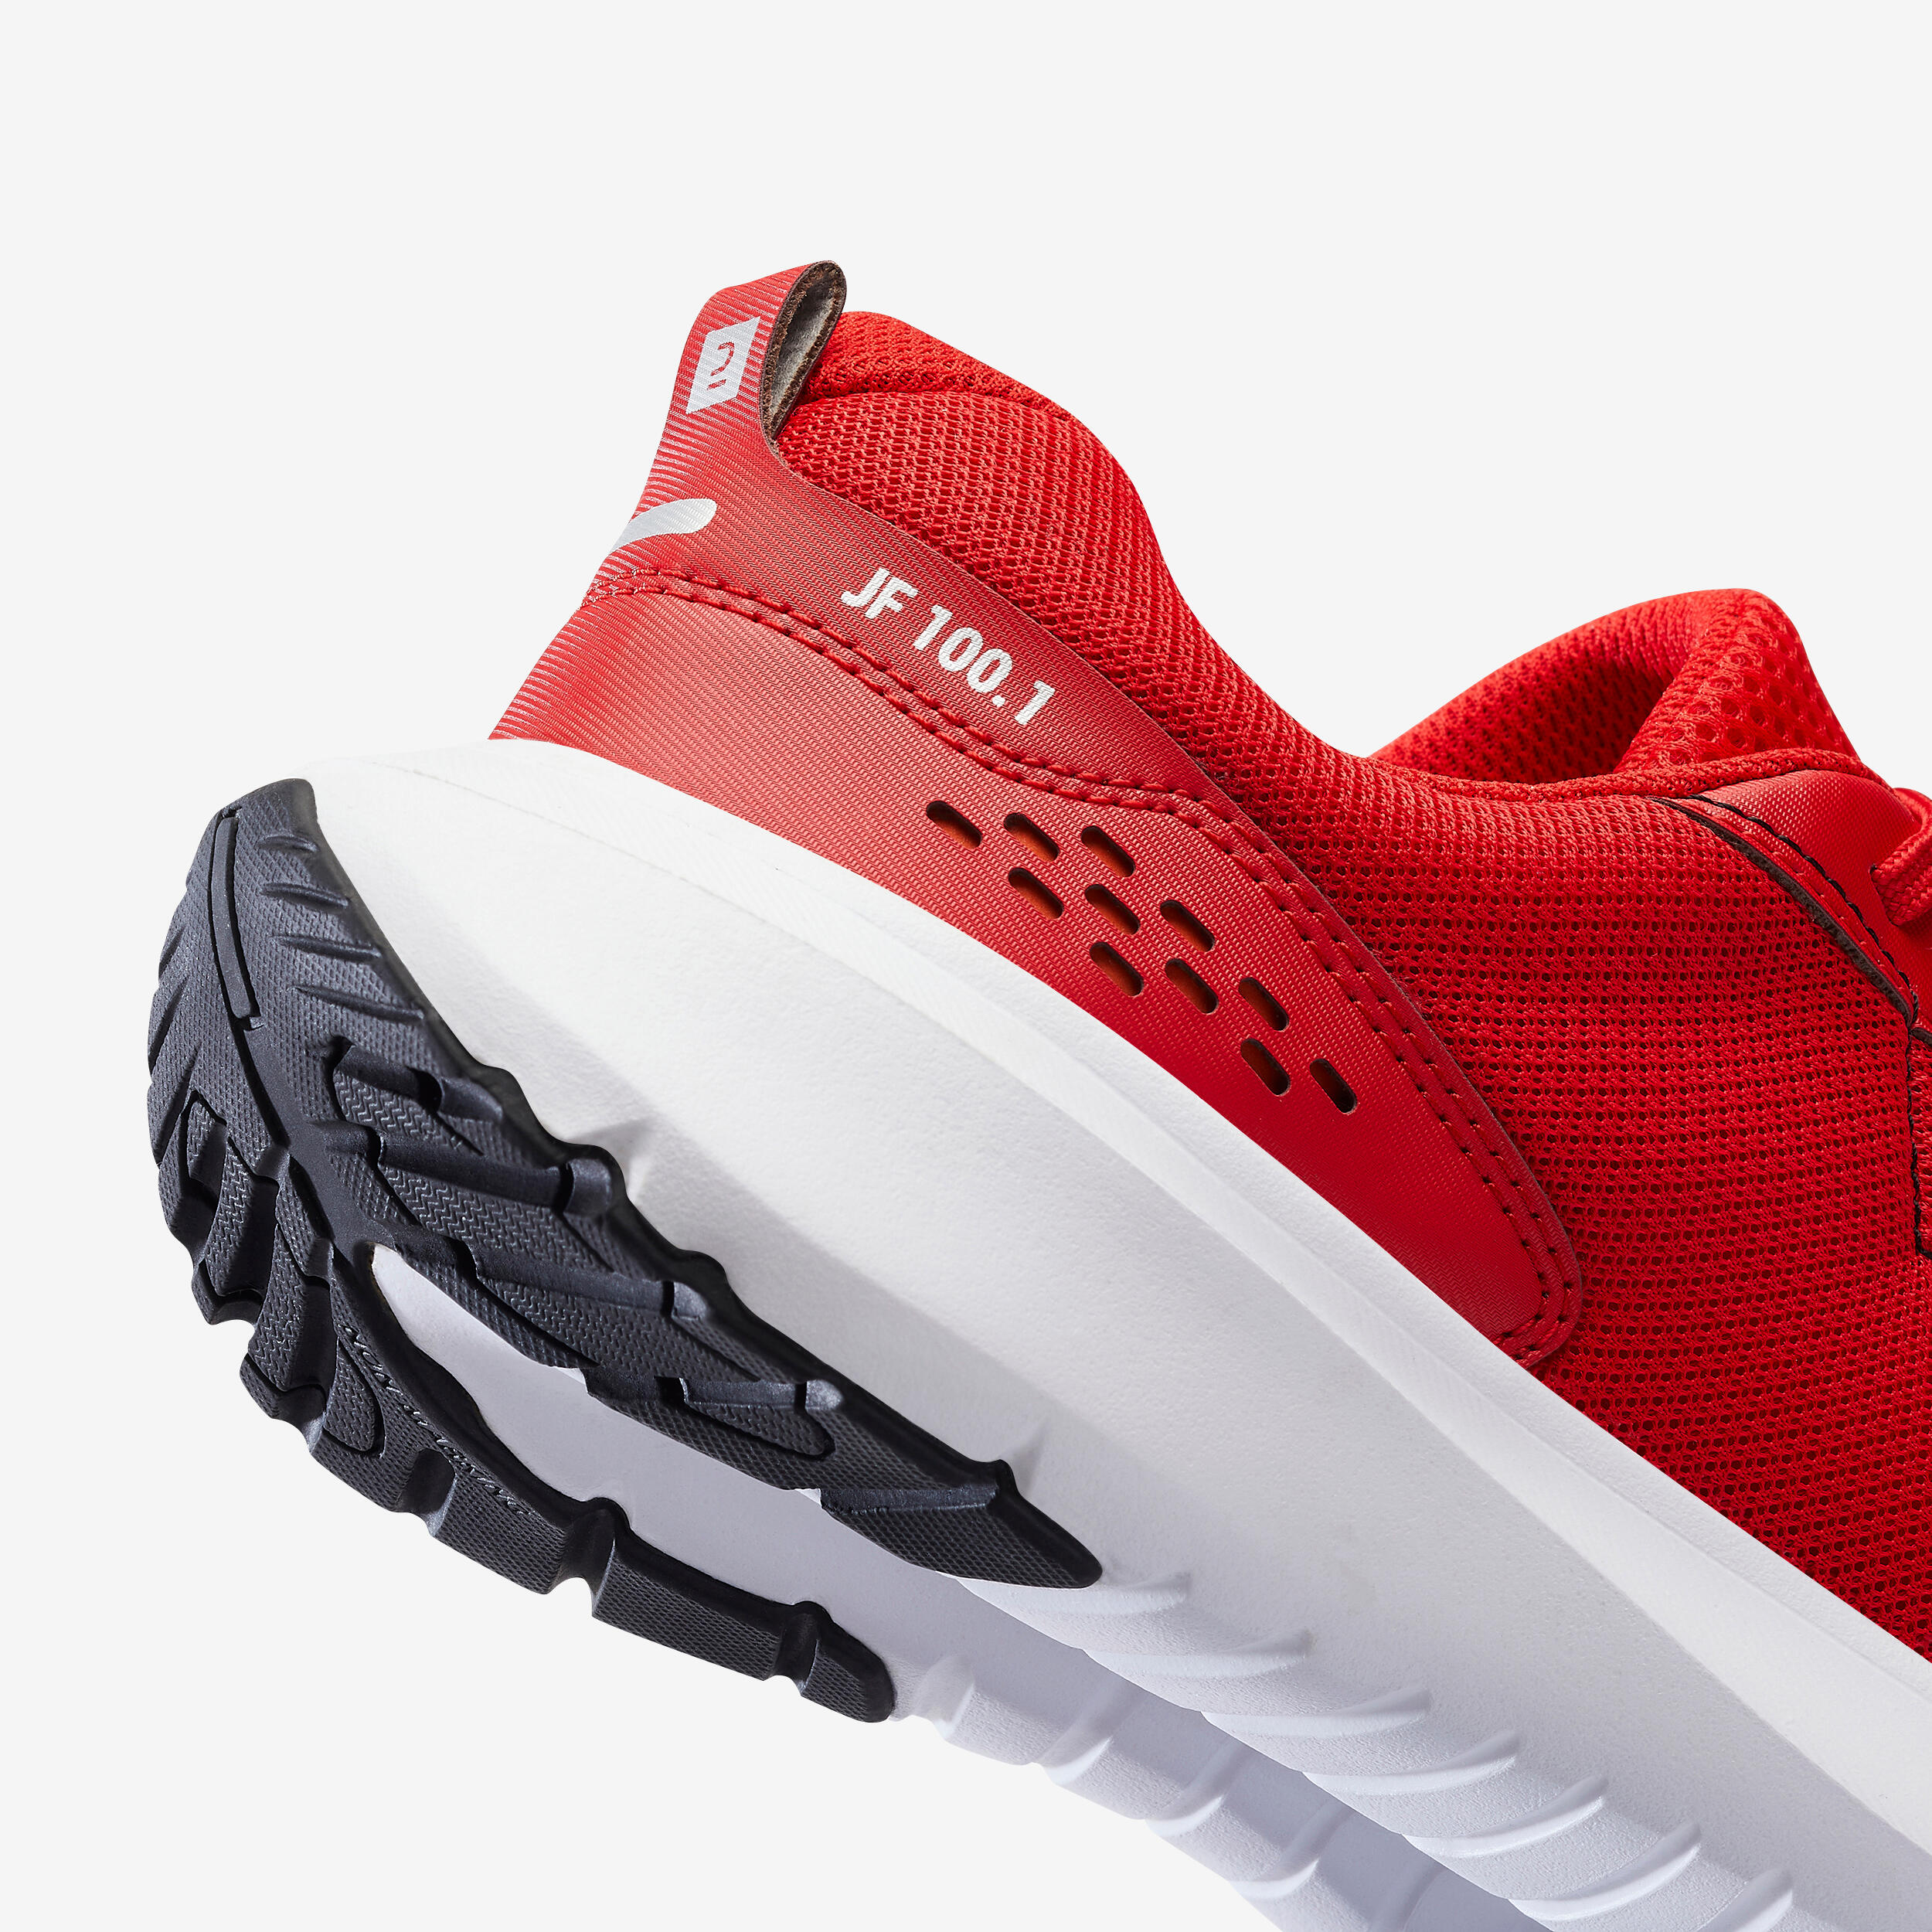 6 Red Sneakers - Get Best Price from Manufacturers & Suppliers in India